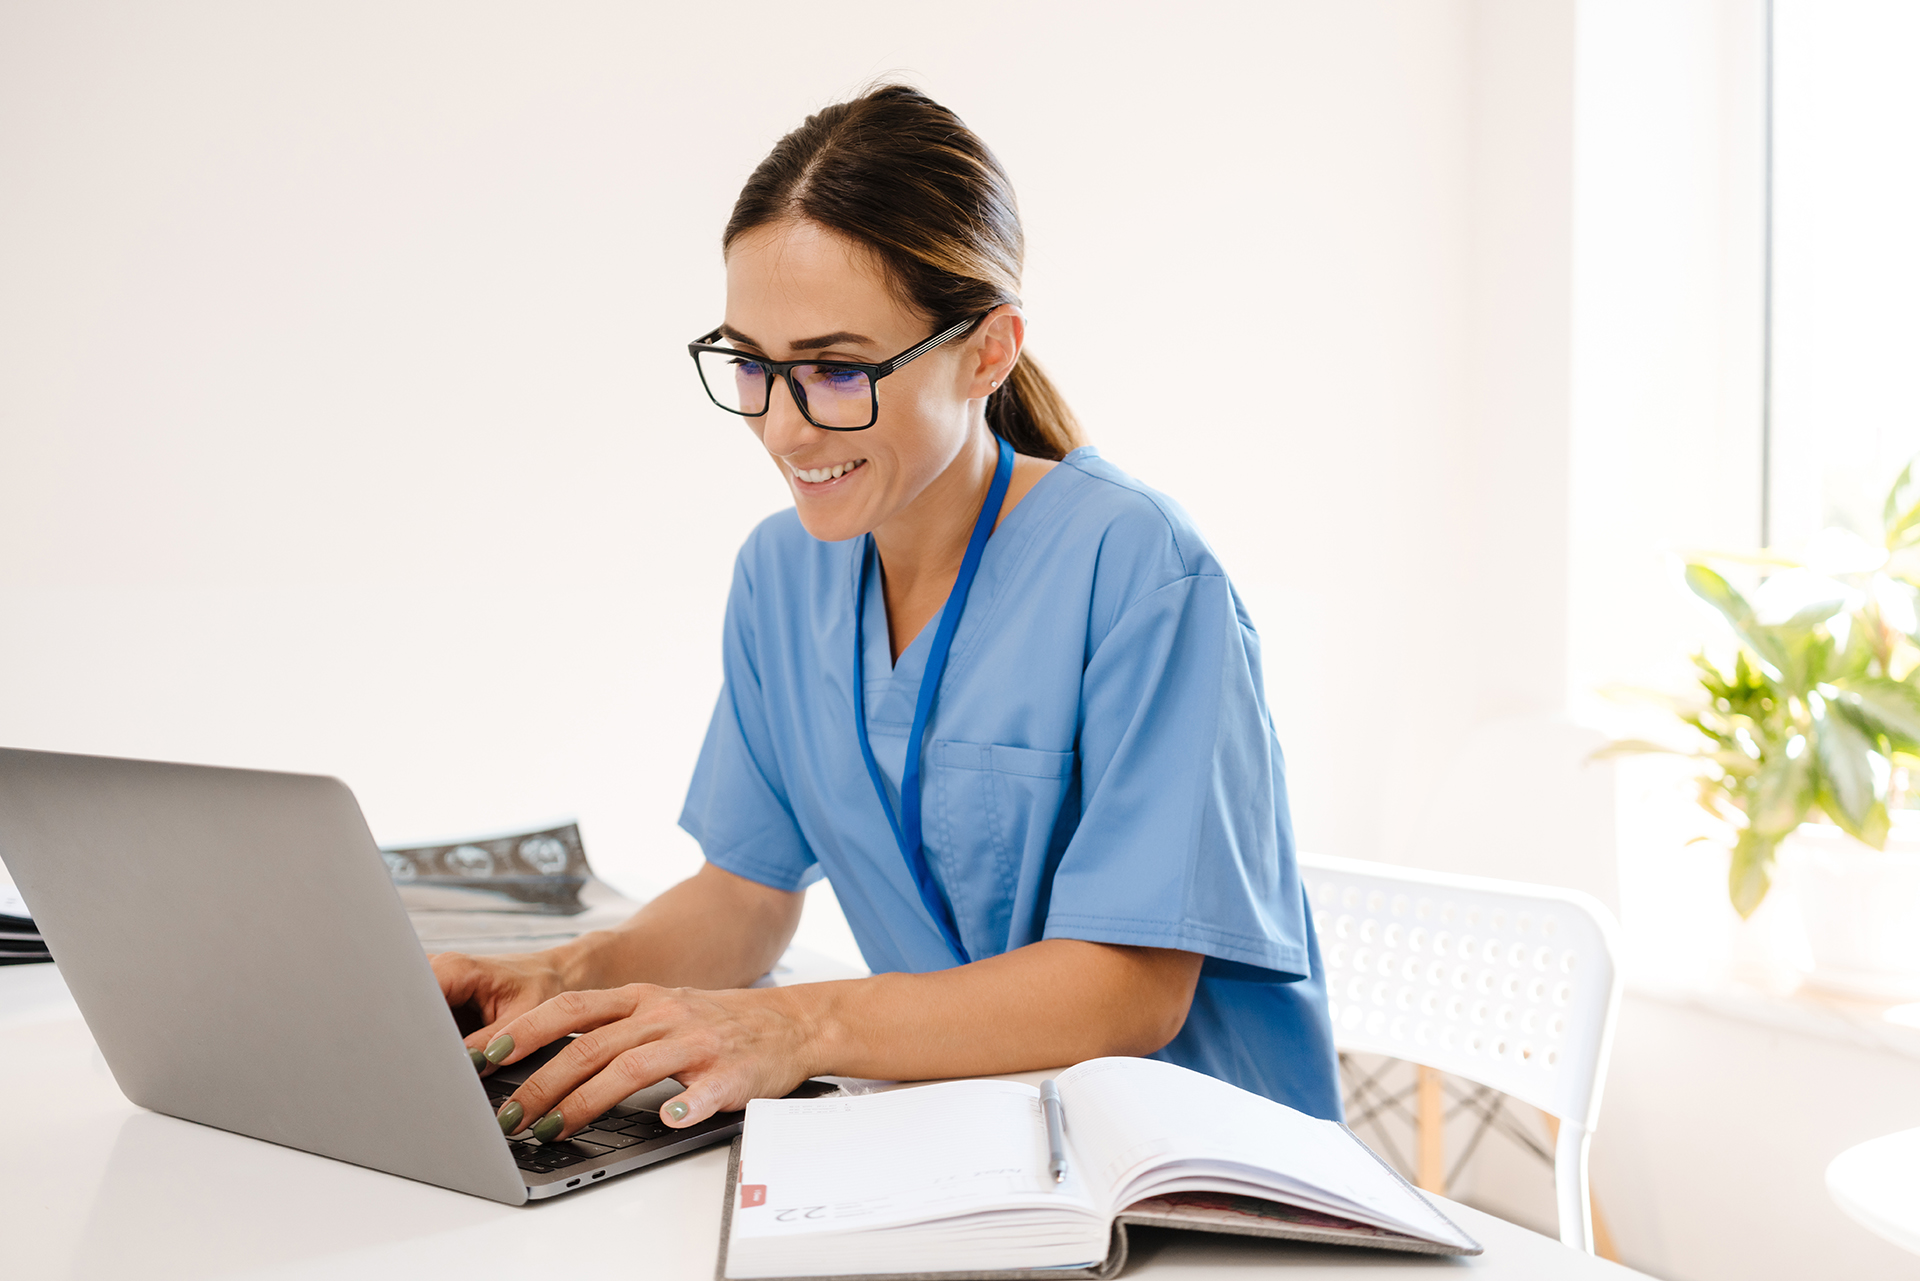 doctor working on a laptop from her office to collaborate with healthcare colleagues remotely